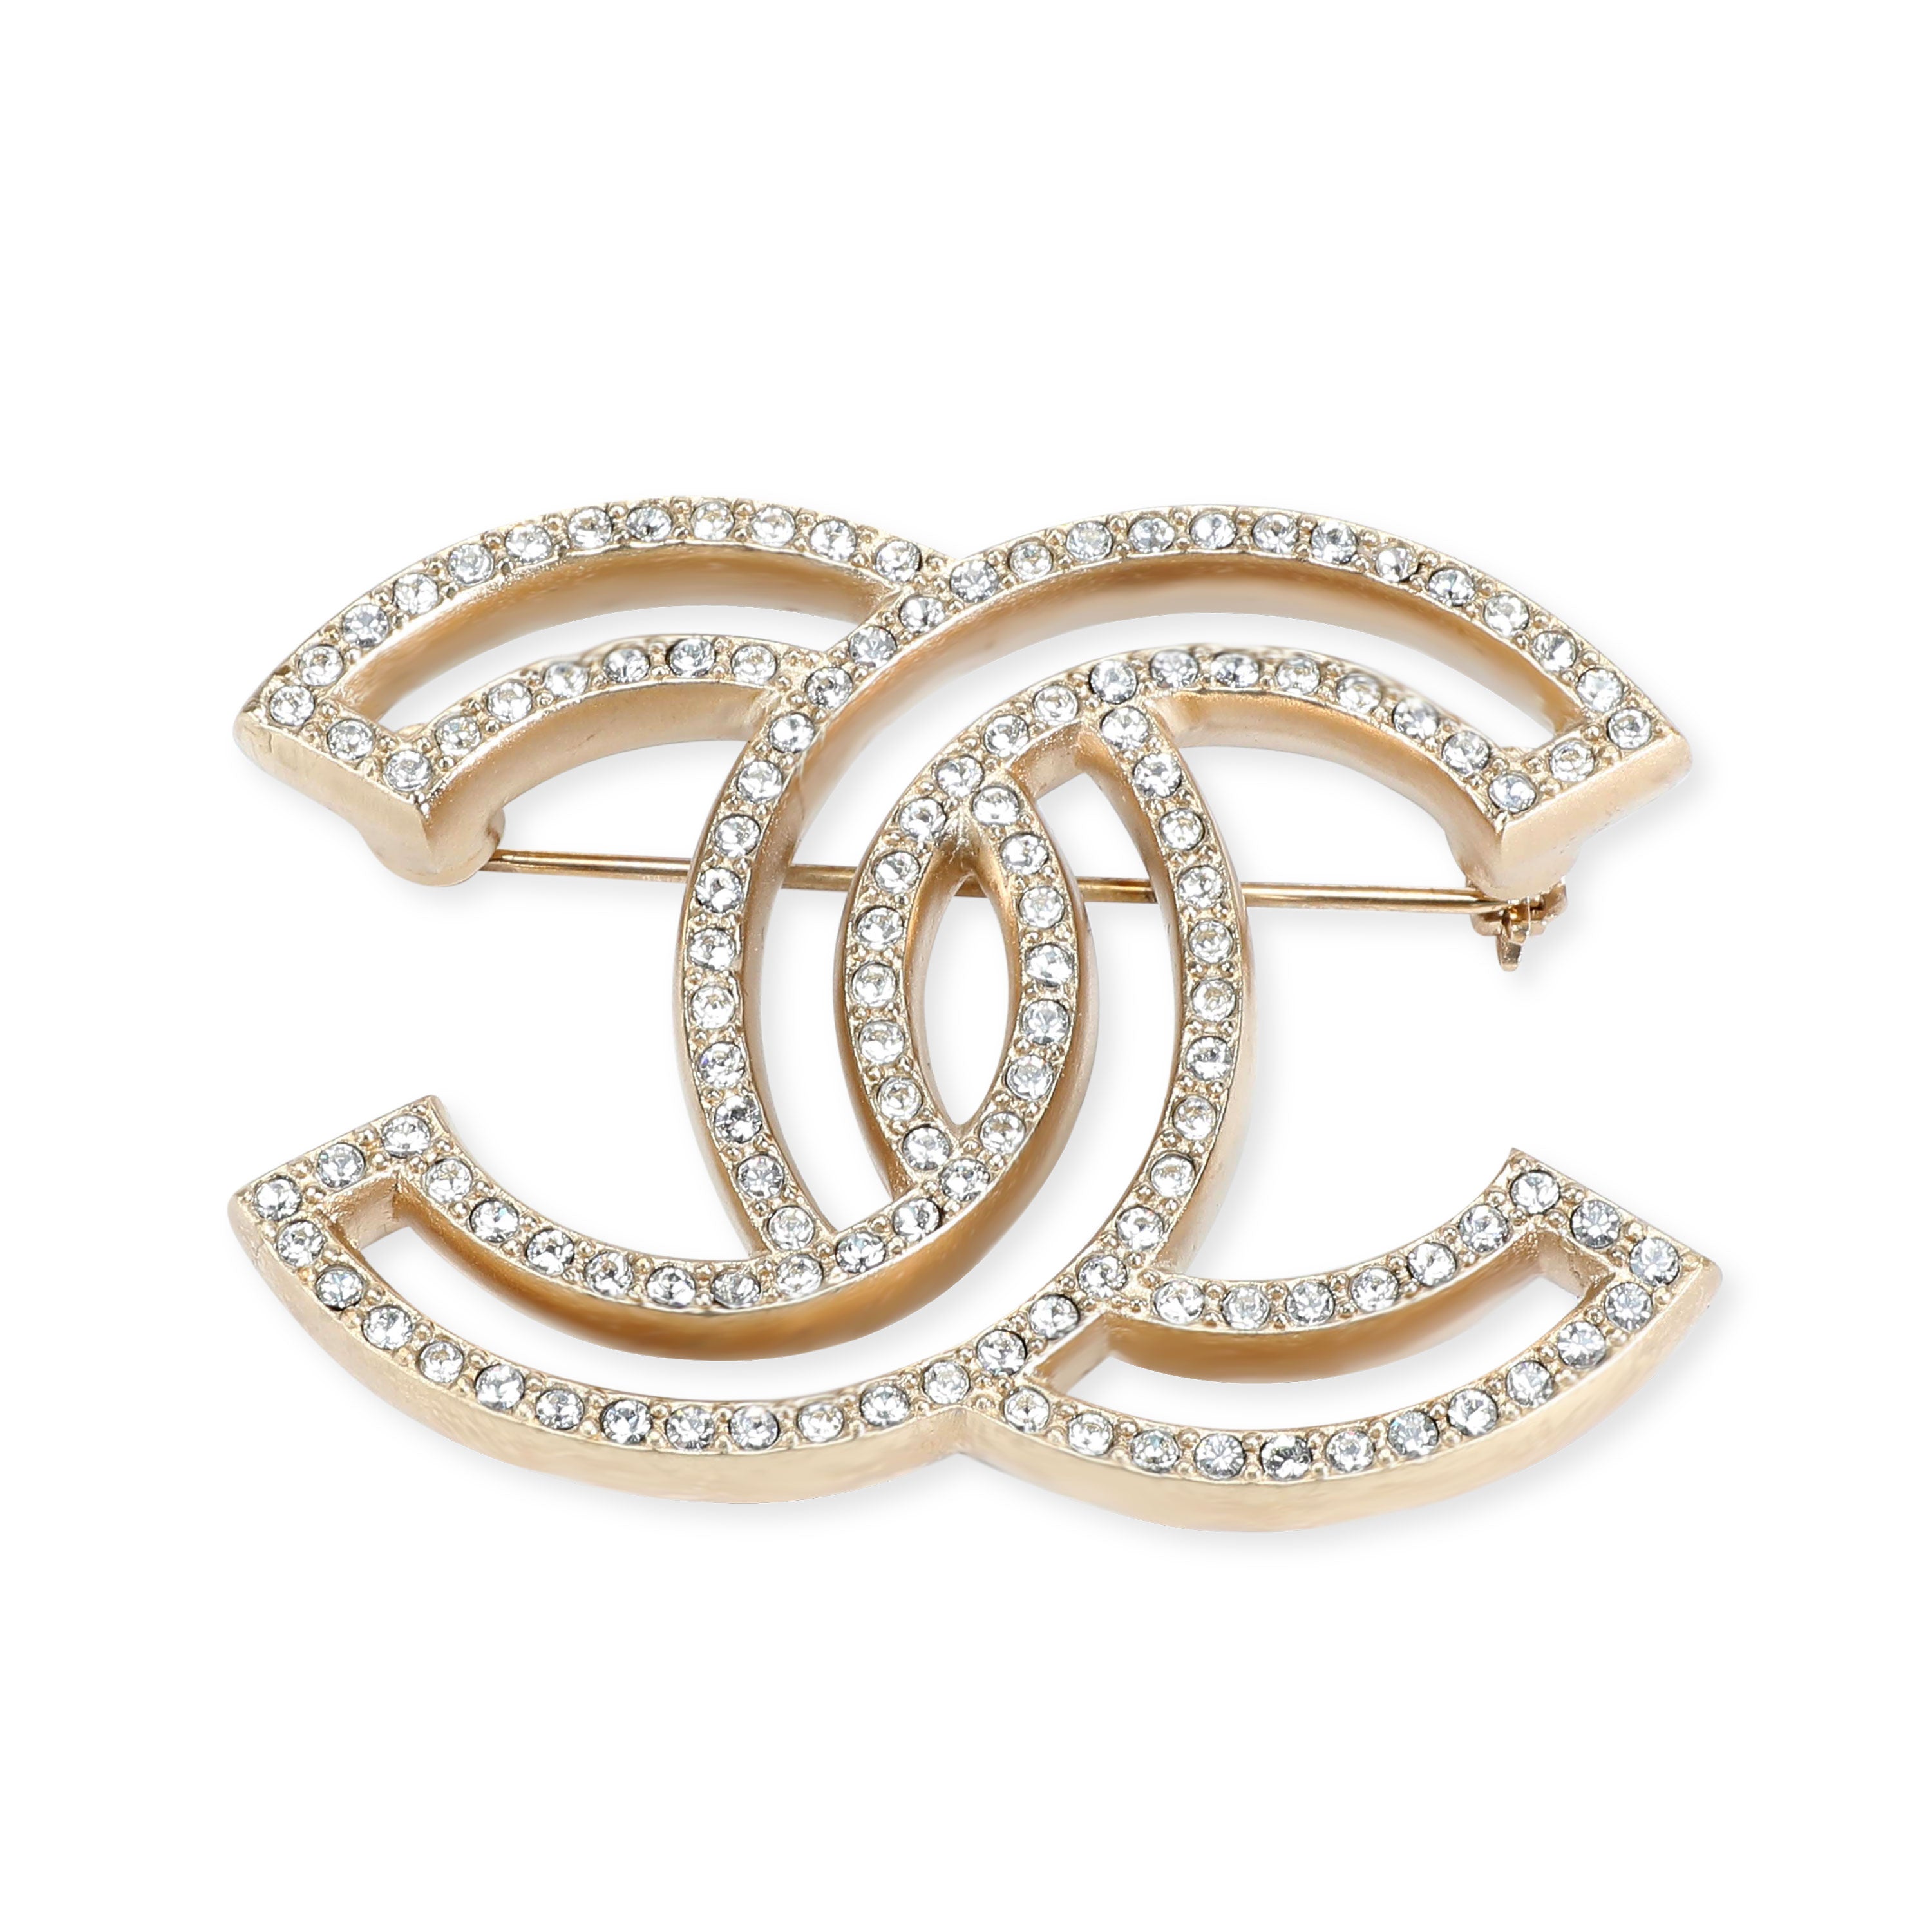 Chanel Costume Double Logo Brooch in Base Metal & Strass